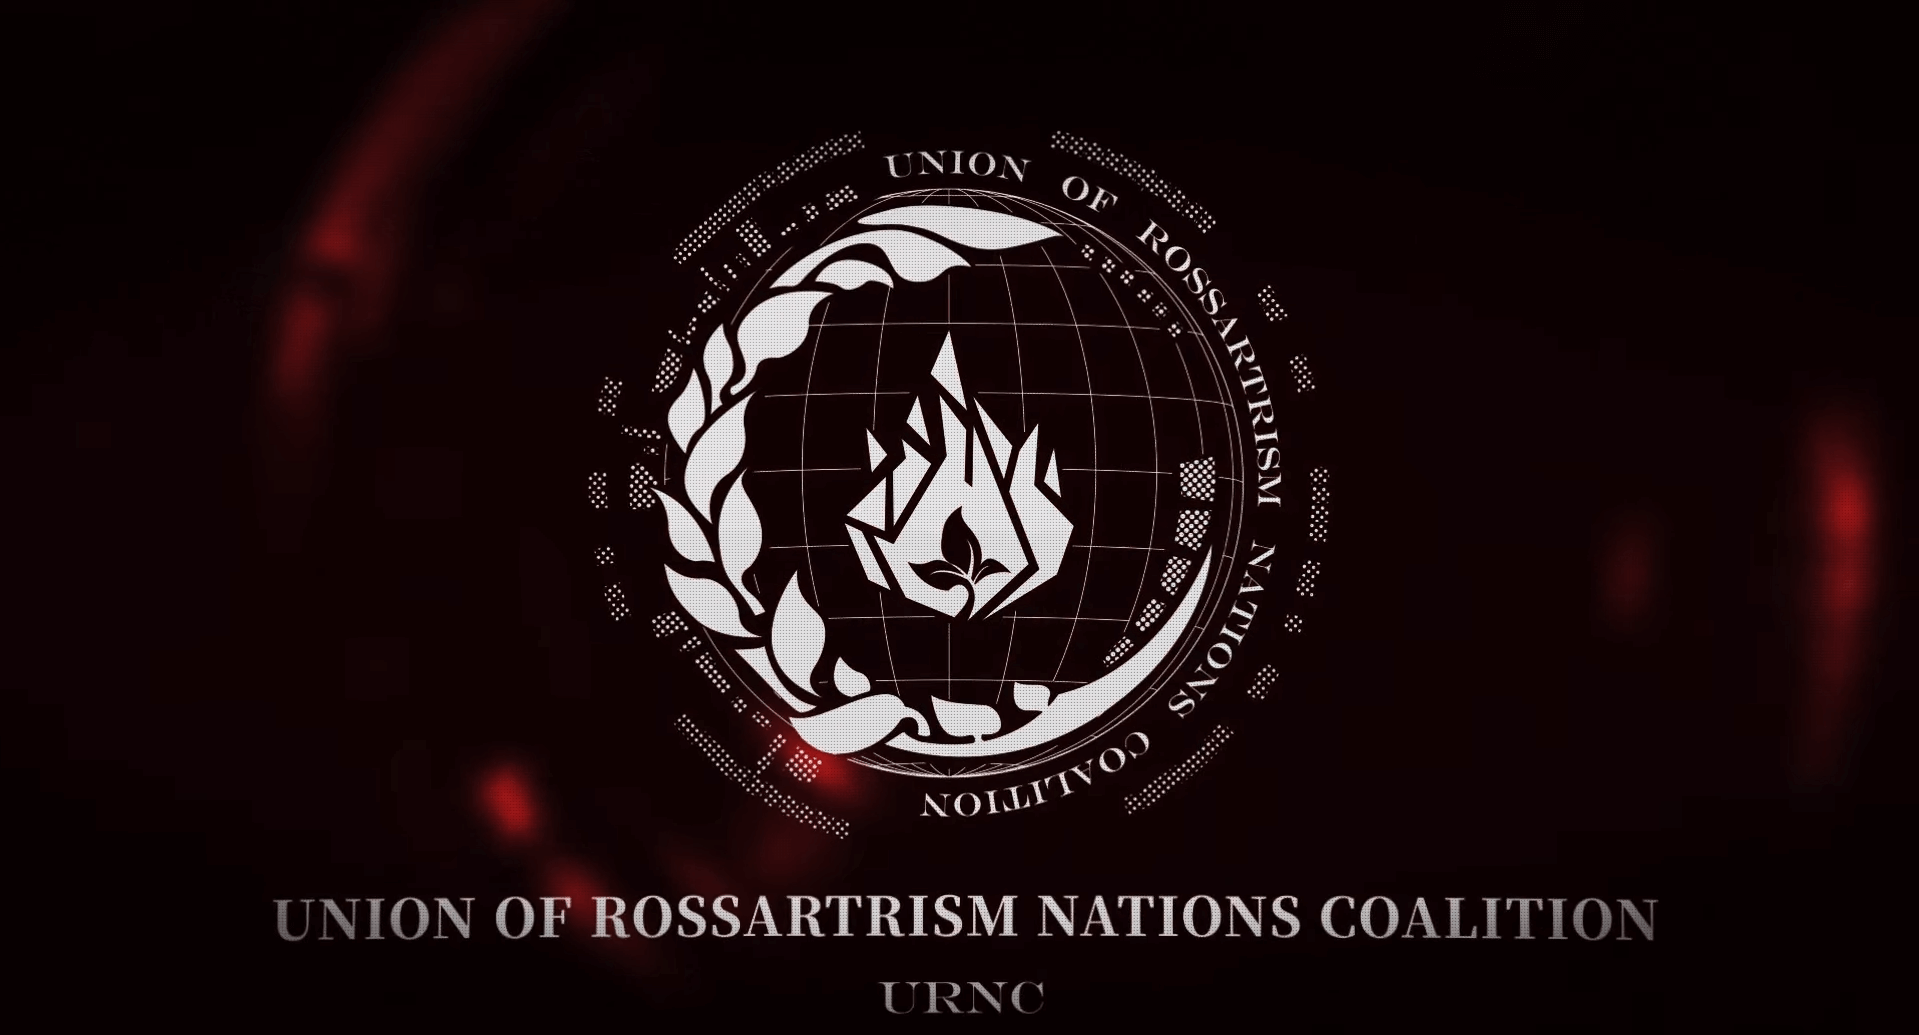 Symbol of the Union of Rossartrism Nations Coalition.